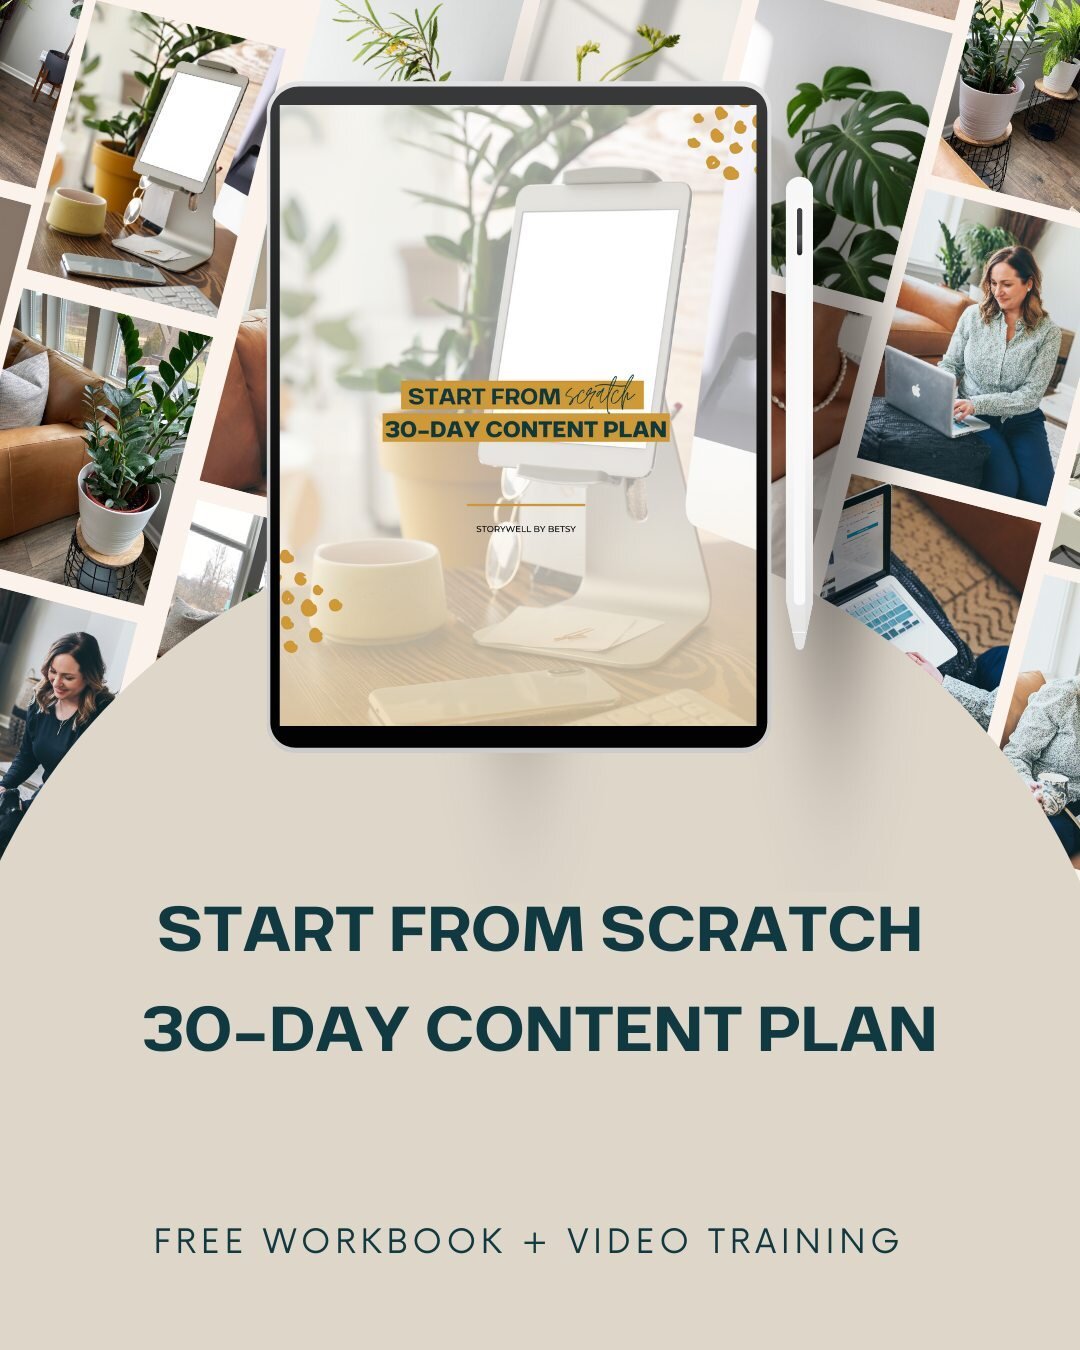 Ready to build (and test) your content plan for the next 30 days?⁠
⁠
I got you covered, friend! ⁠
⁠
This recorded workshop + workbook walks you through, step by step, how to create a purposeful content plan for the next 30 days.⁠
⁠
 - Even if you hav